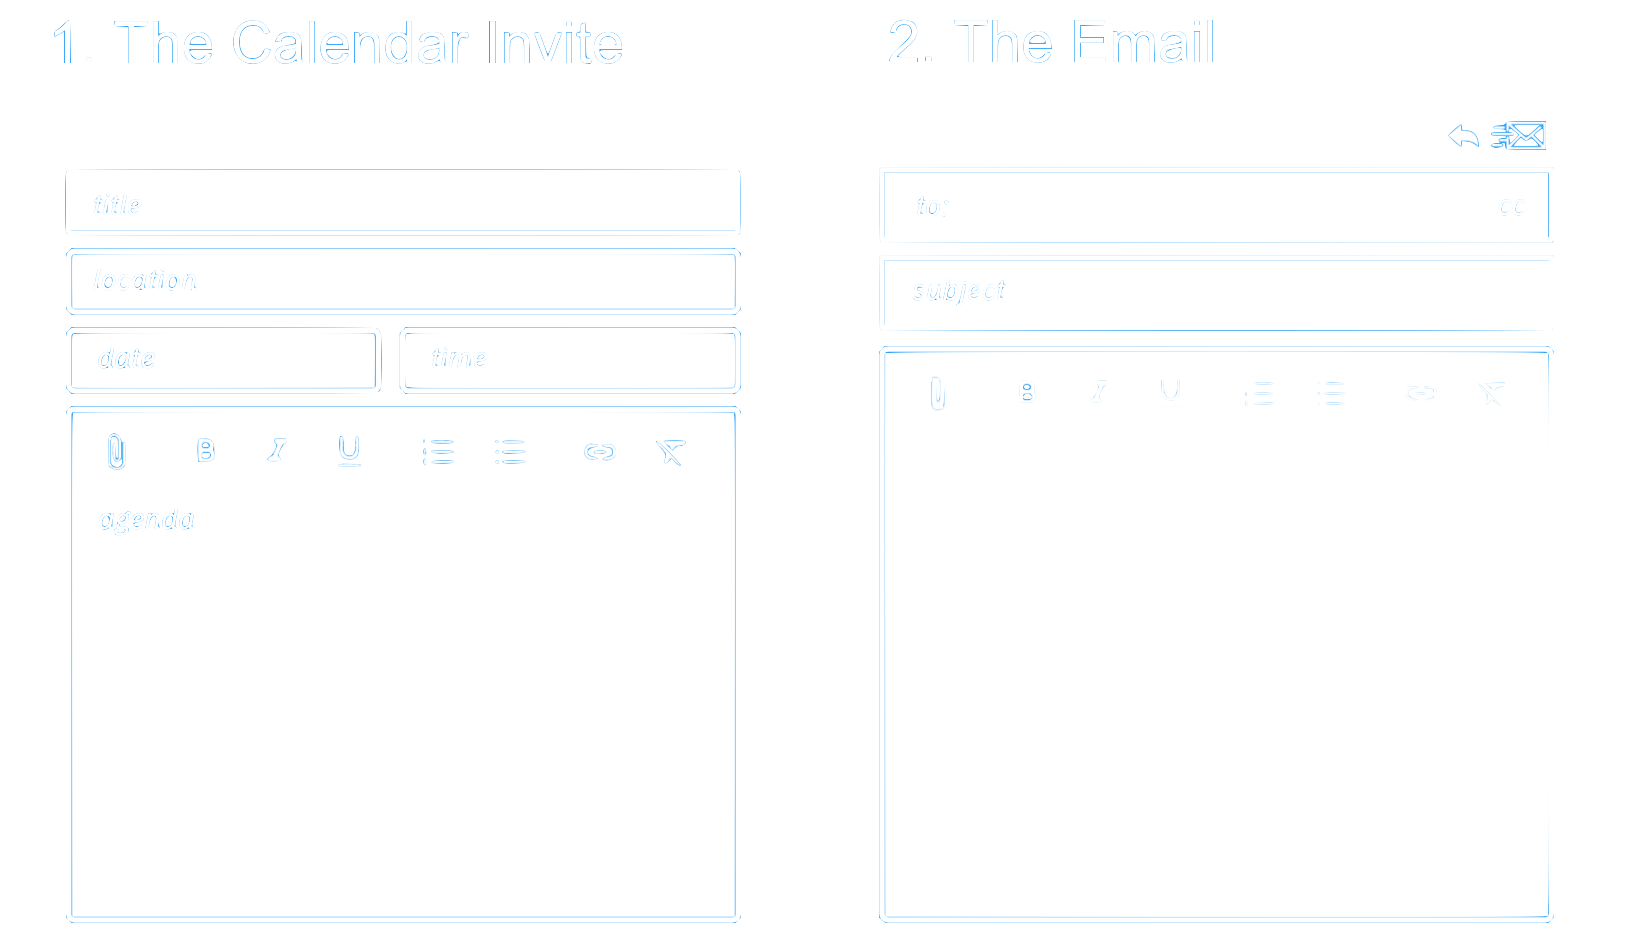 setting up a calendar invite and email